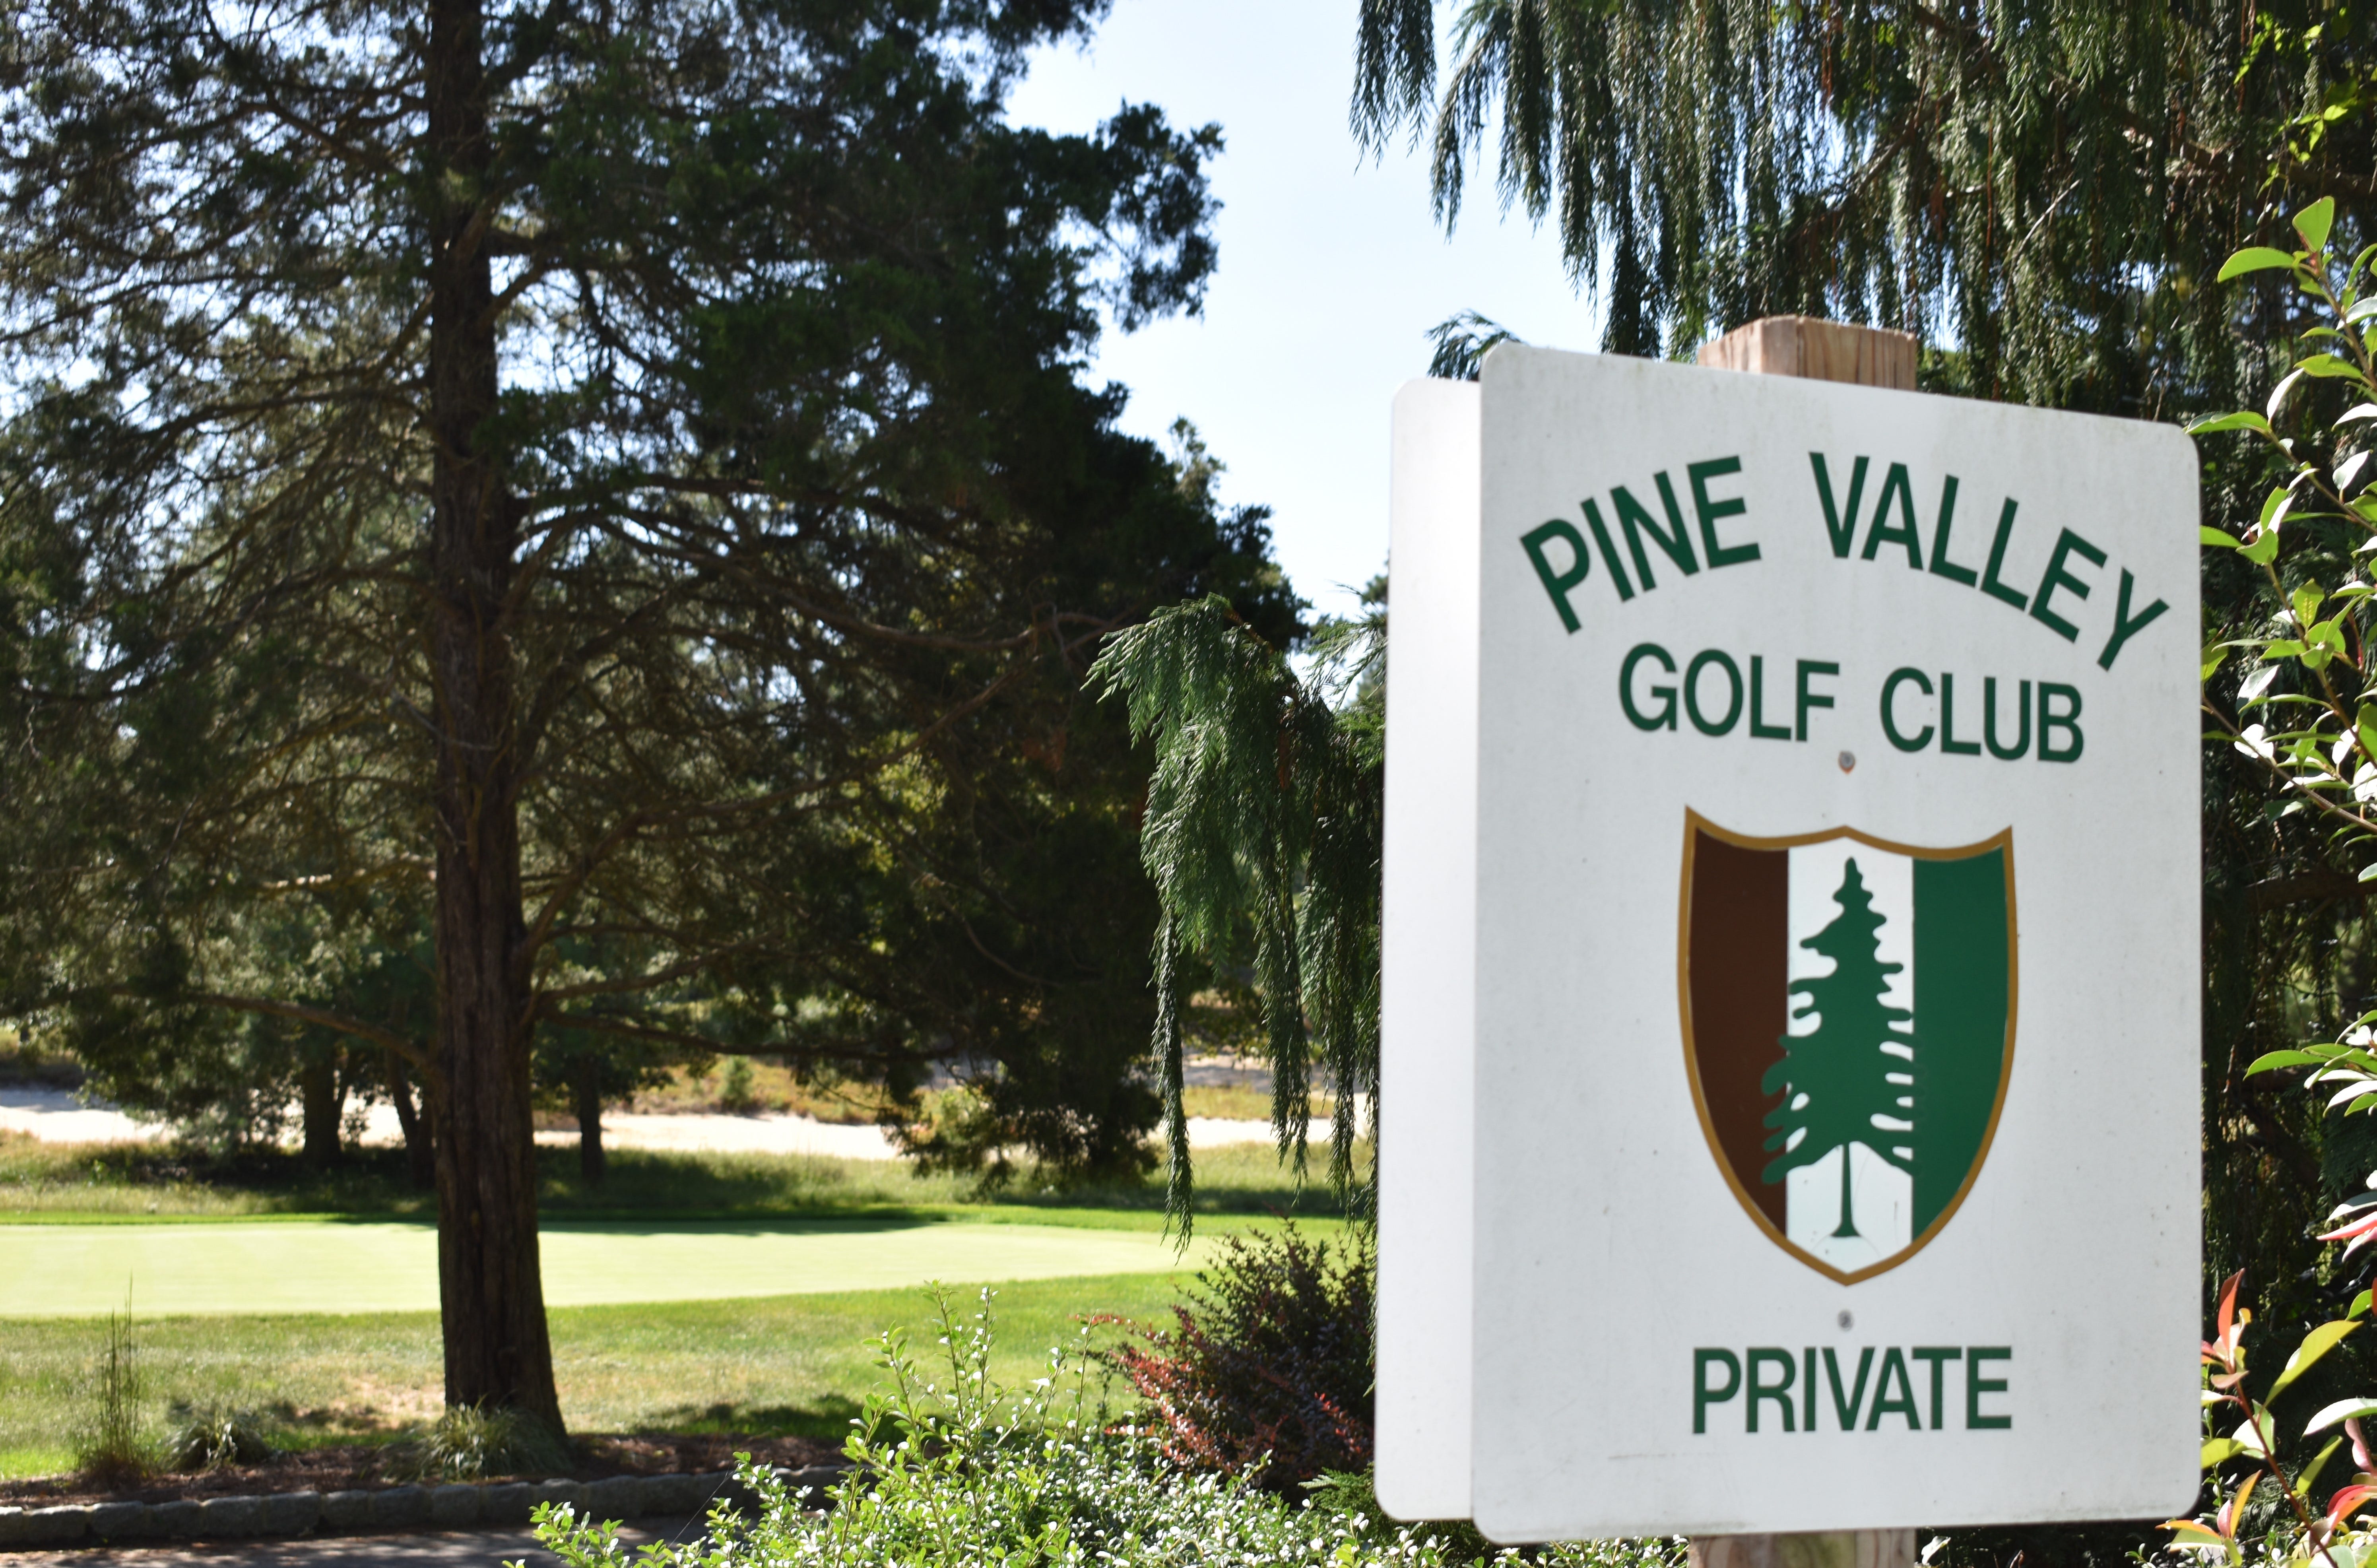 Here are 10 things you didn’t know about the Crump Cup at Pine Valley